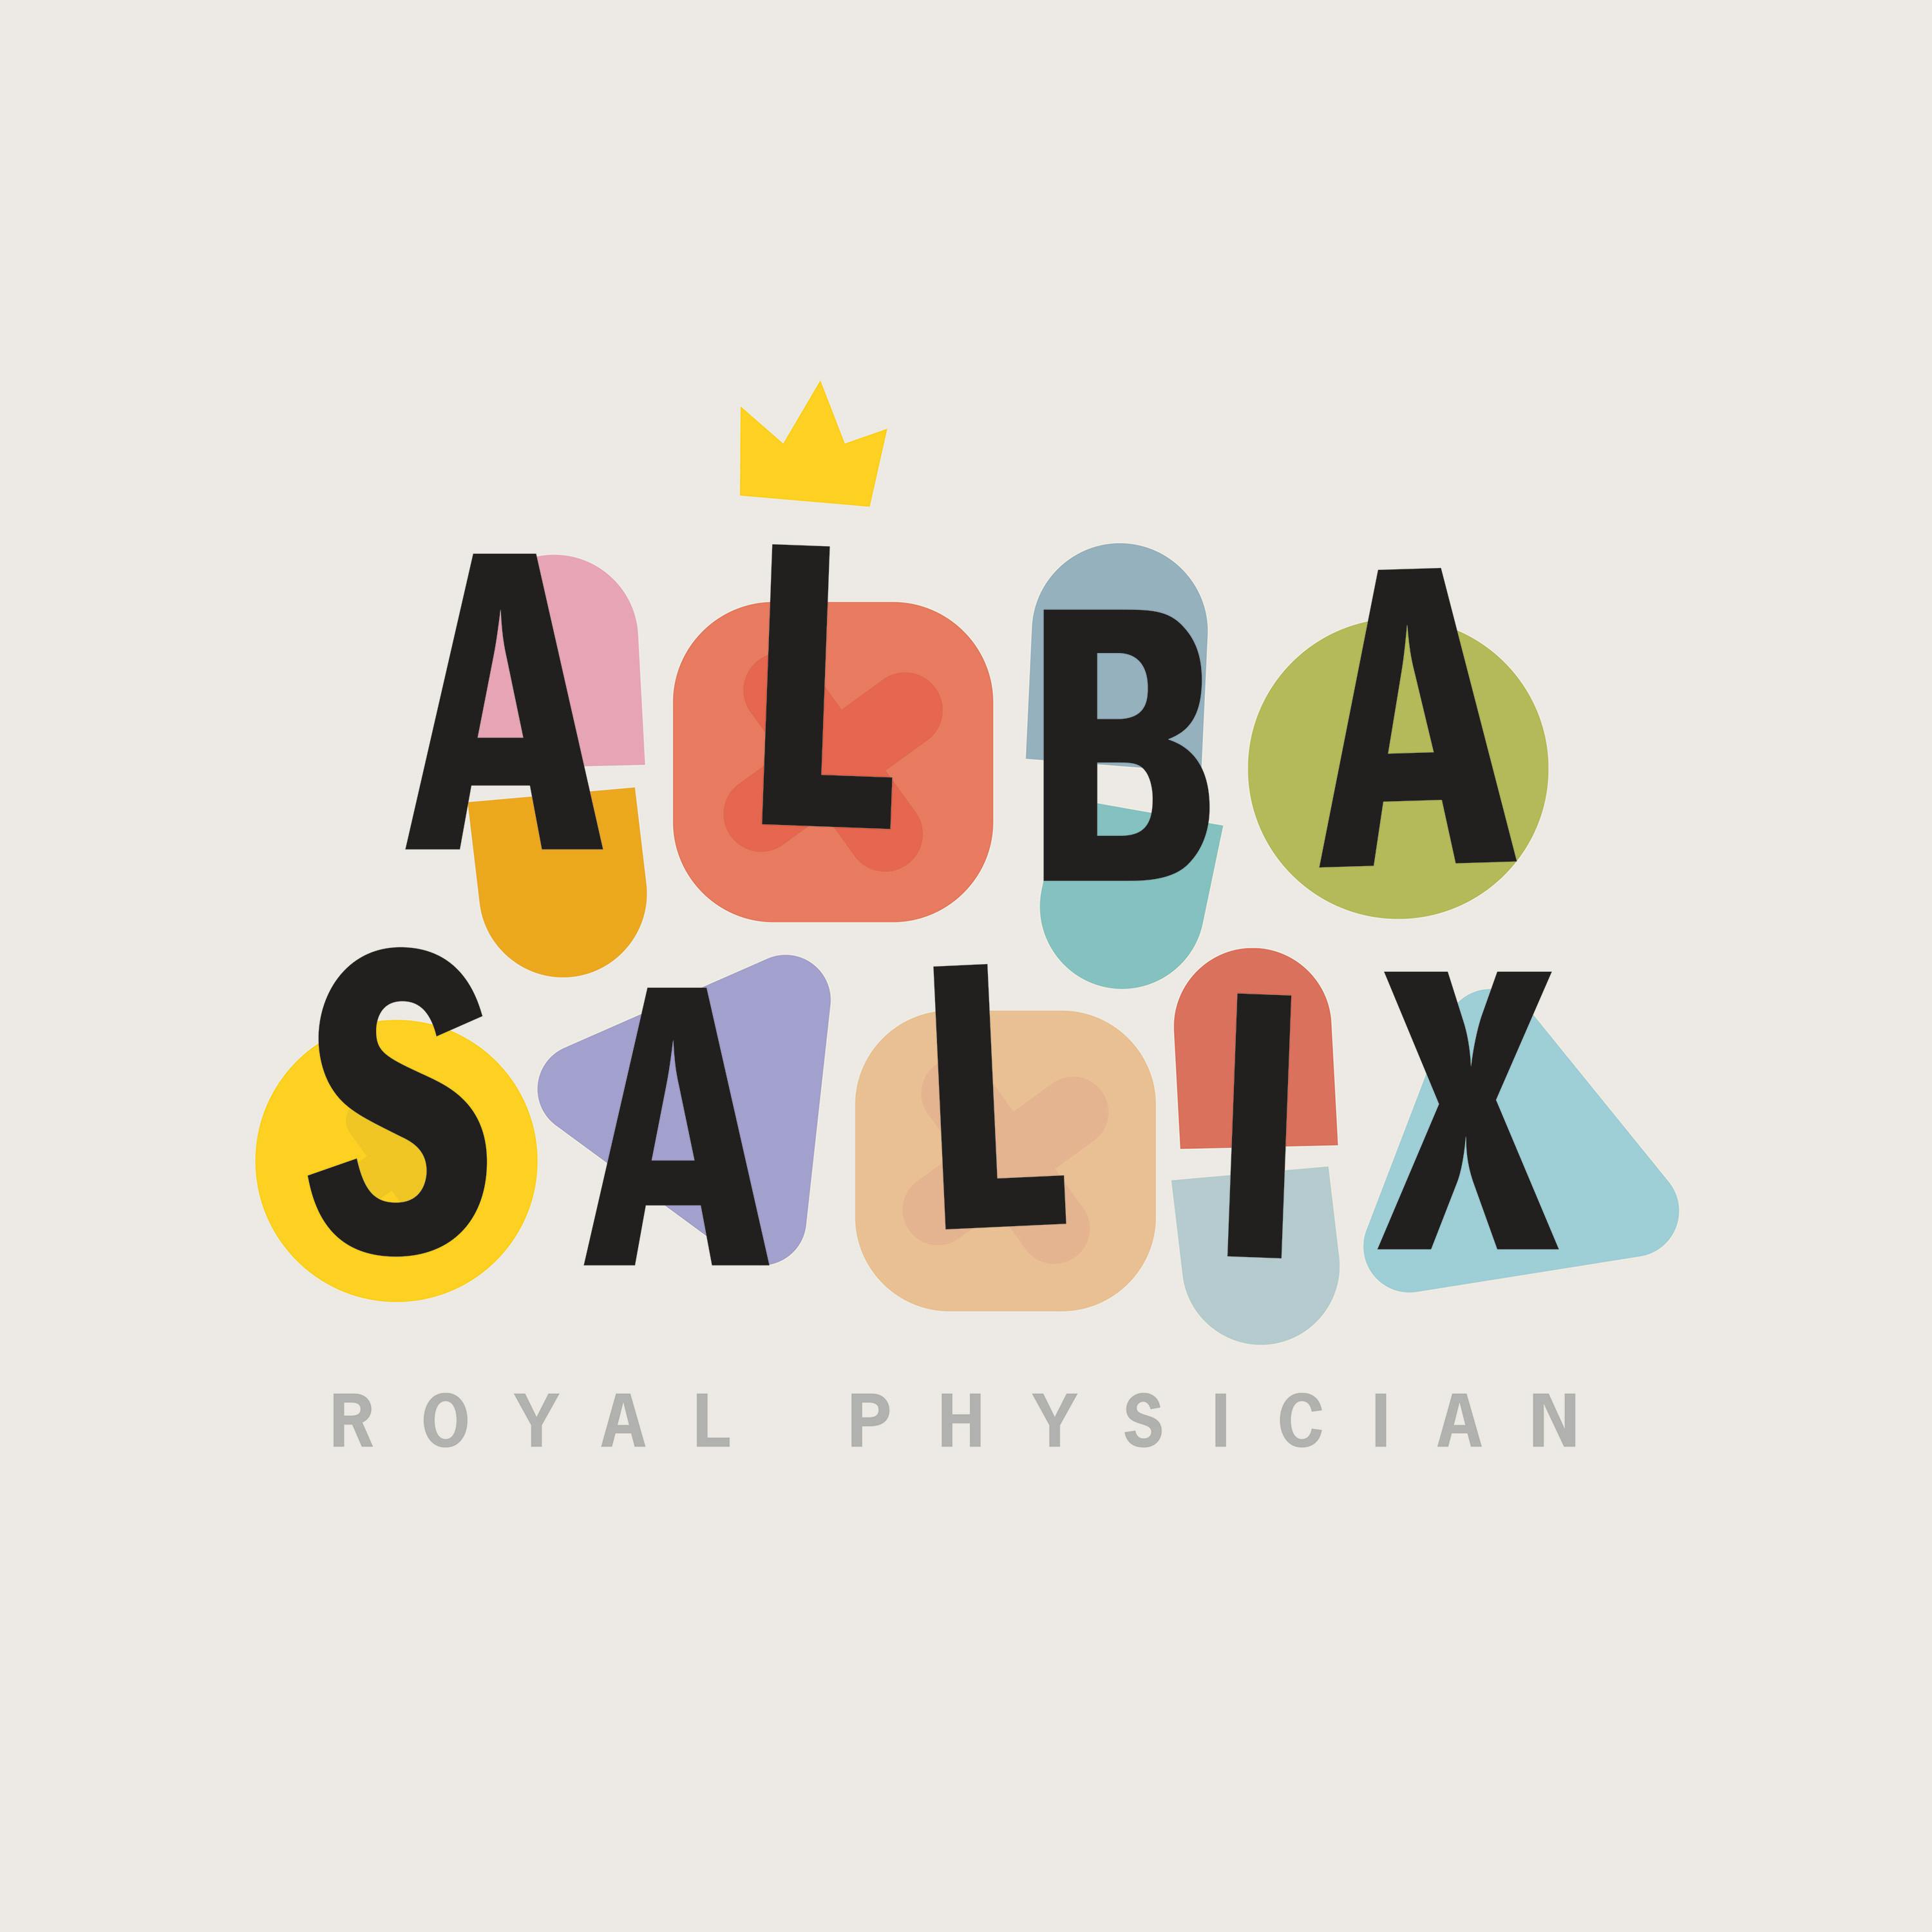 Alba Salix Mini-Episodes: "Clairvoy-Can't" and "Hiding Out"